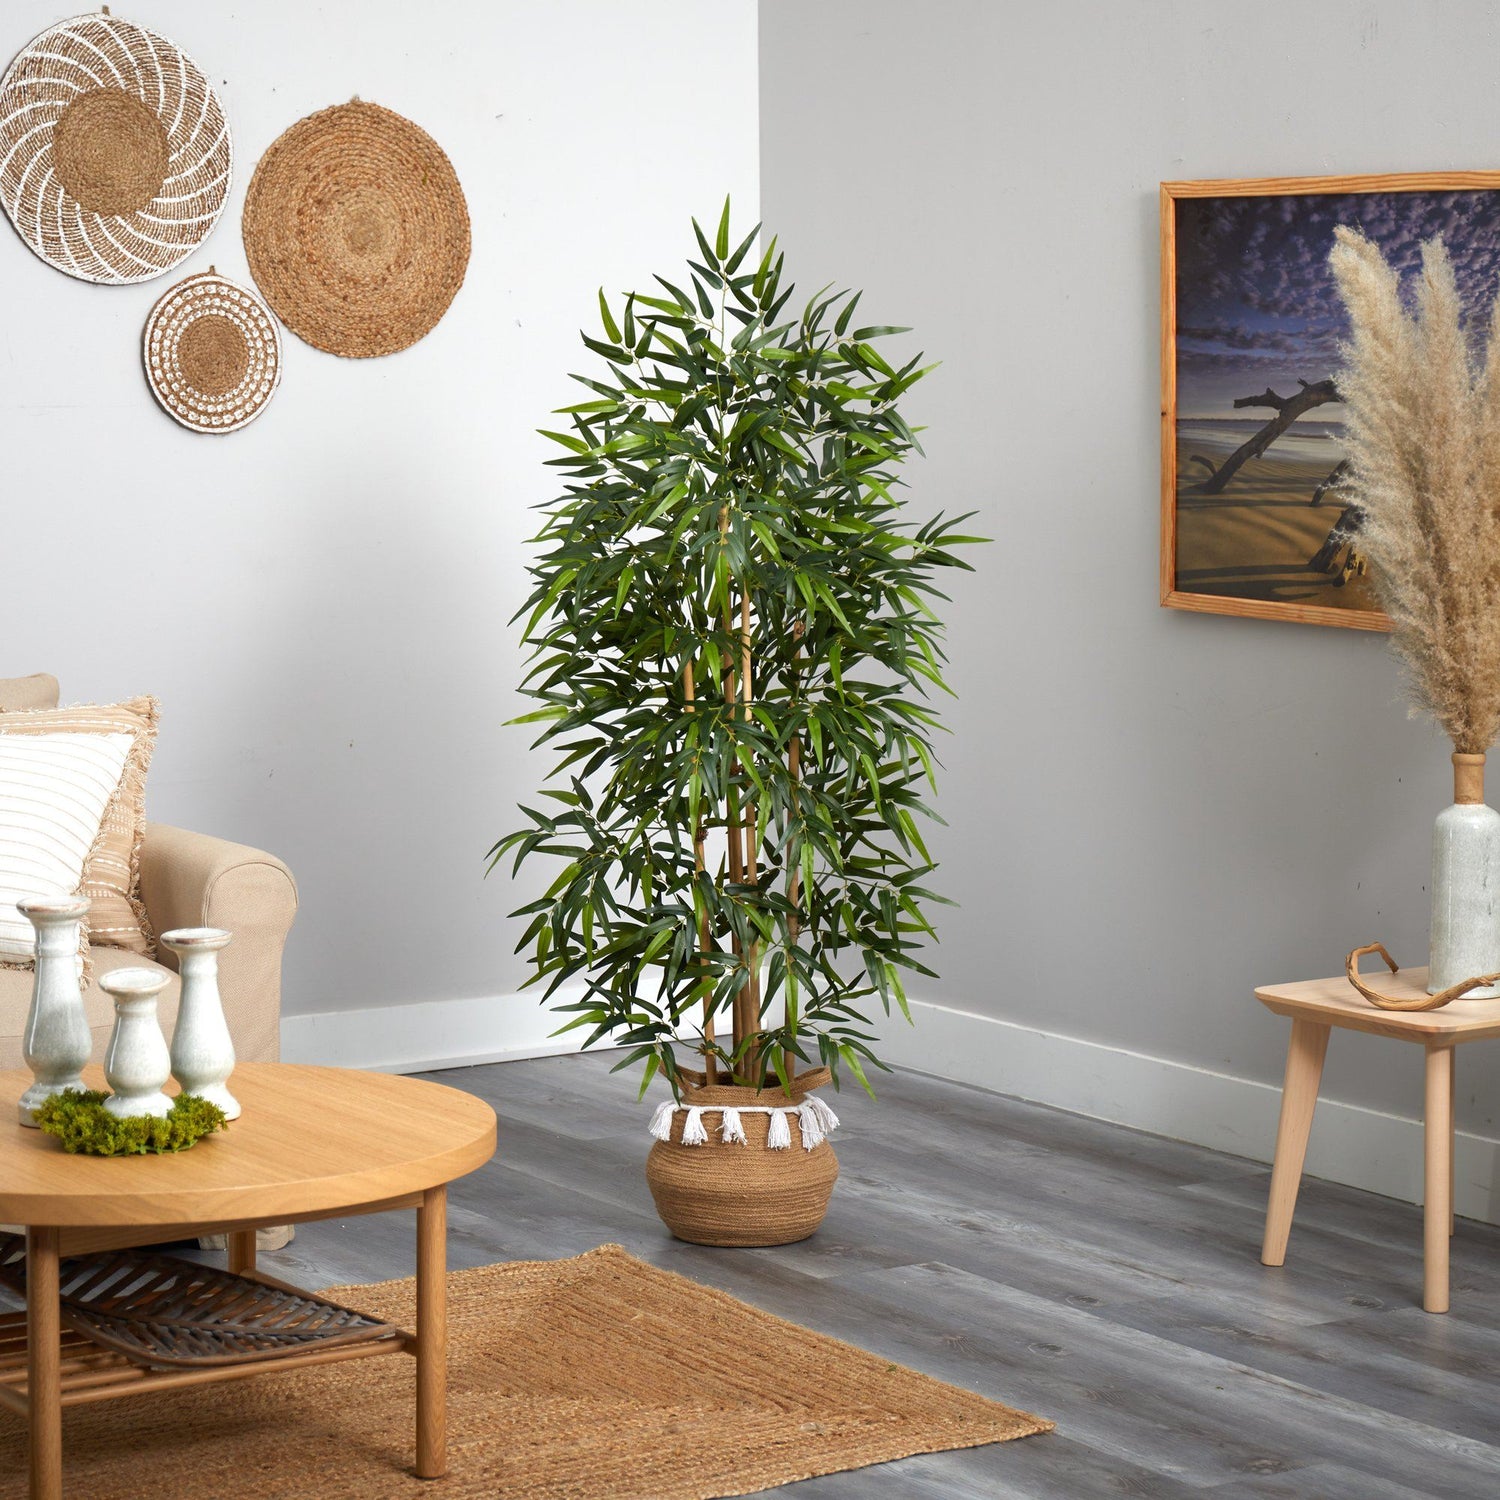 64” Bamboo Tree with Natural Bamboo Trunks in Boho Chic Handmade Natural Planter with Tassels